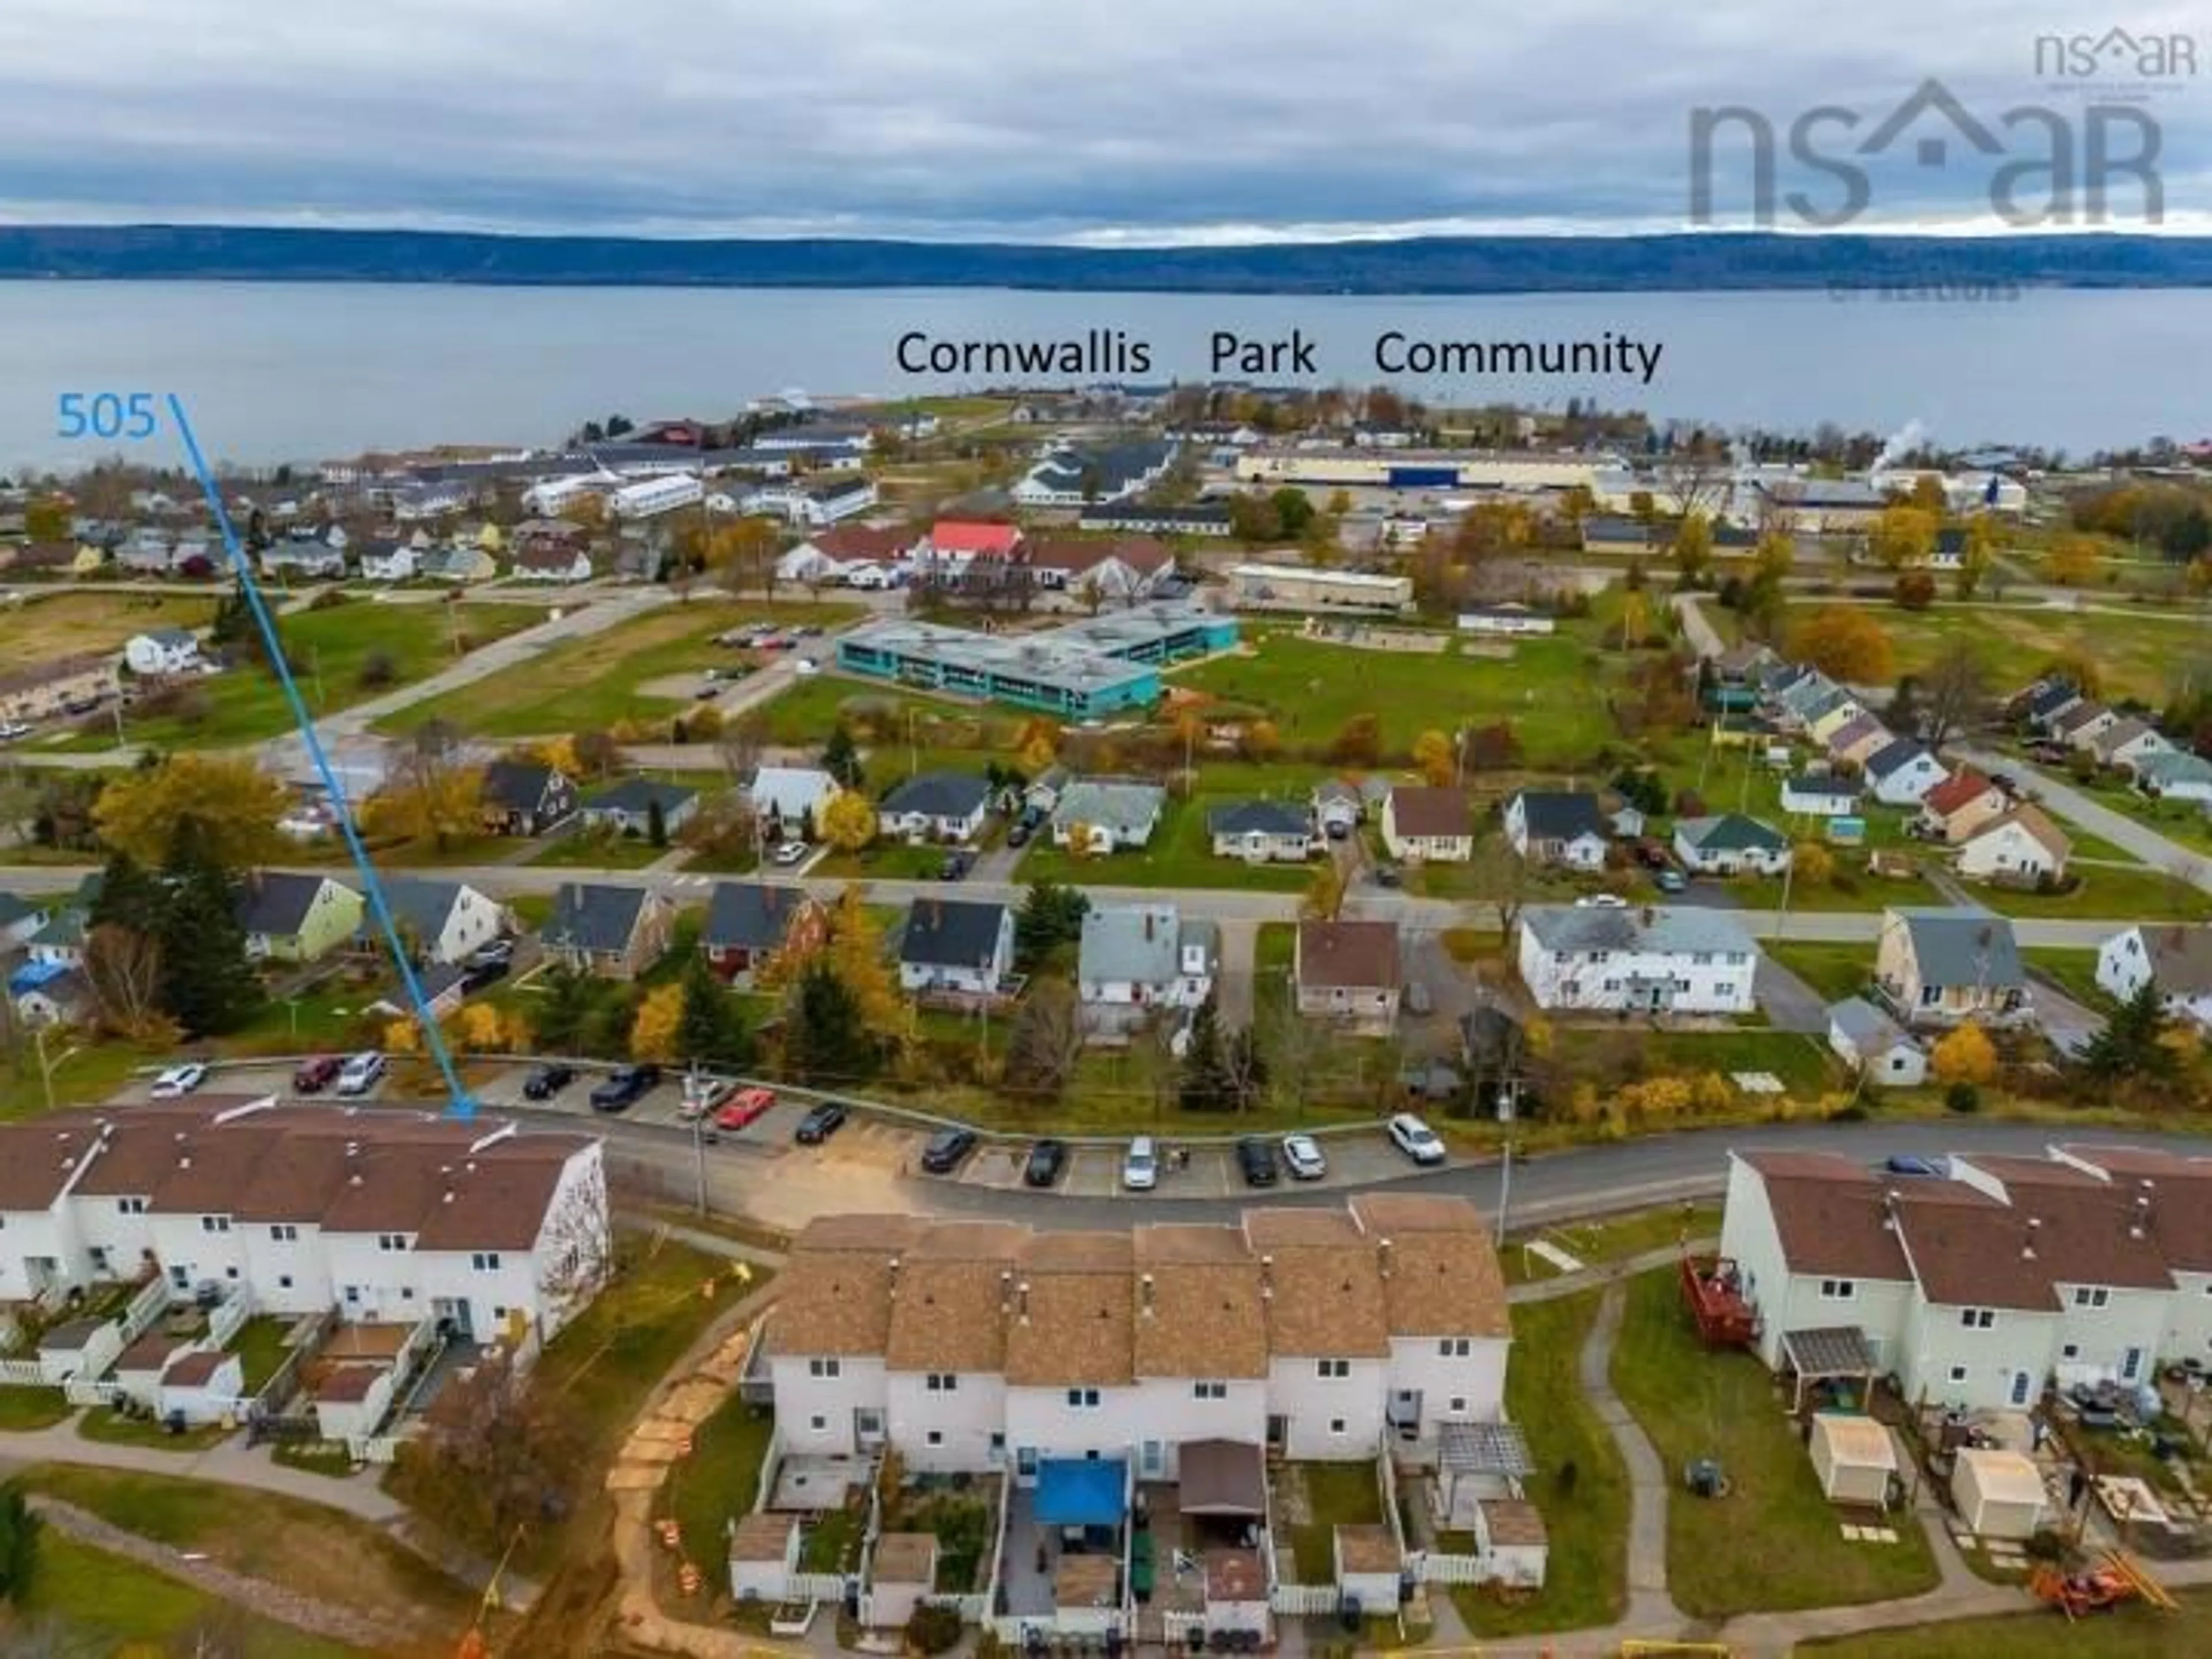 Home with unknown exterior material for 505 Harbourview Crescent, Cornwallis Park Nova Scotia B0S 1H0